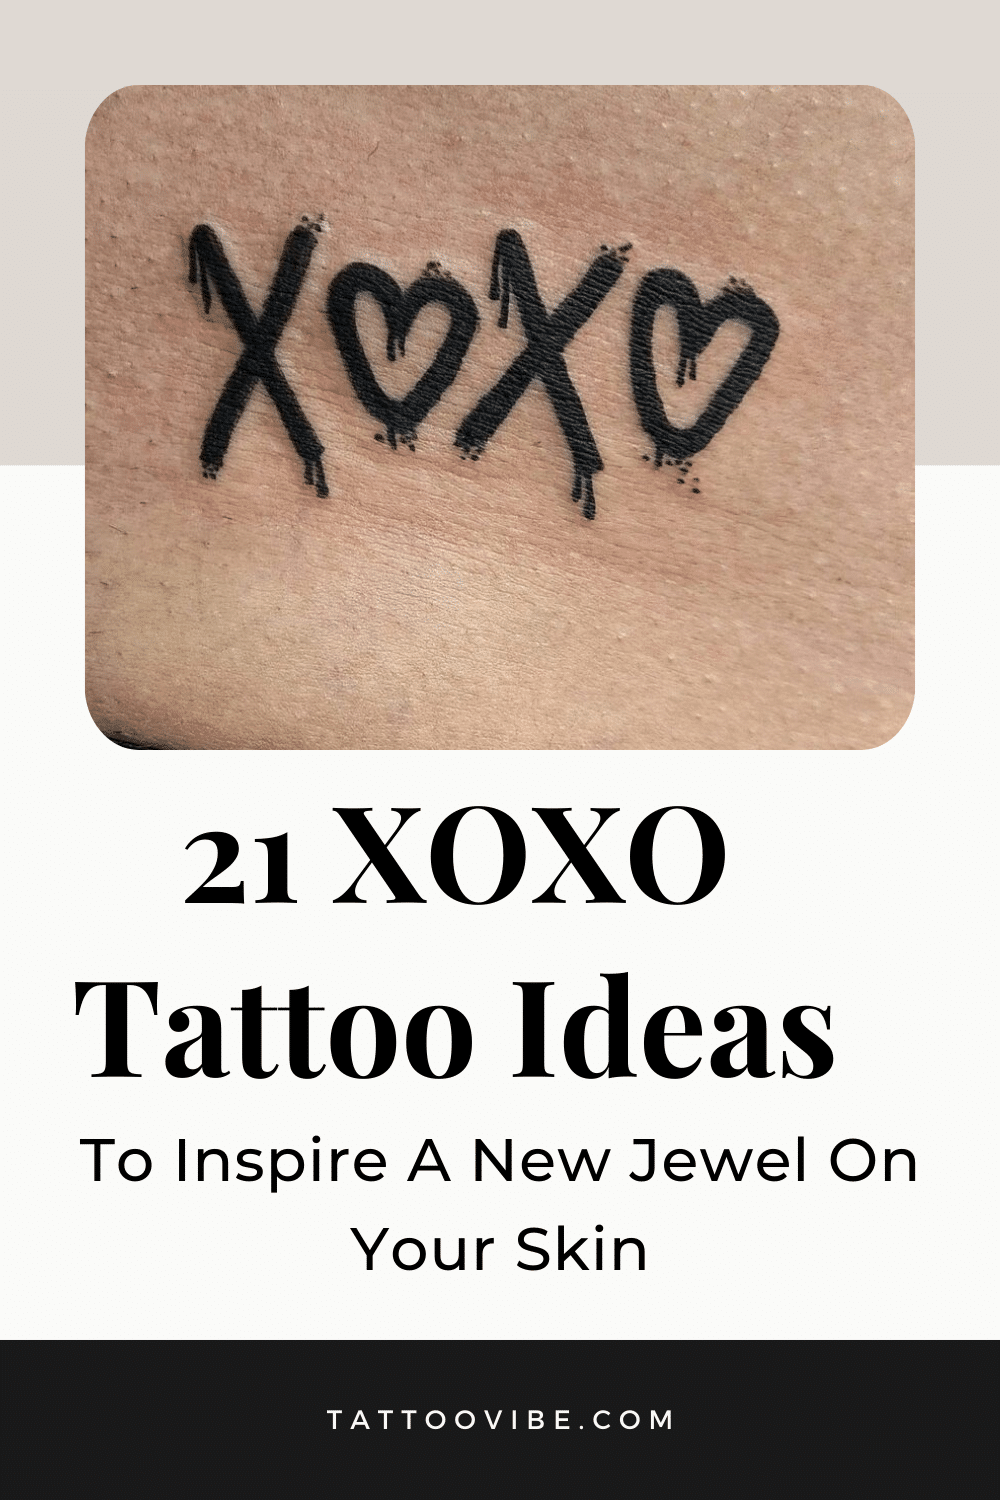 To Inspire A New Jewel On Your Skin